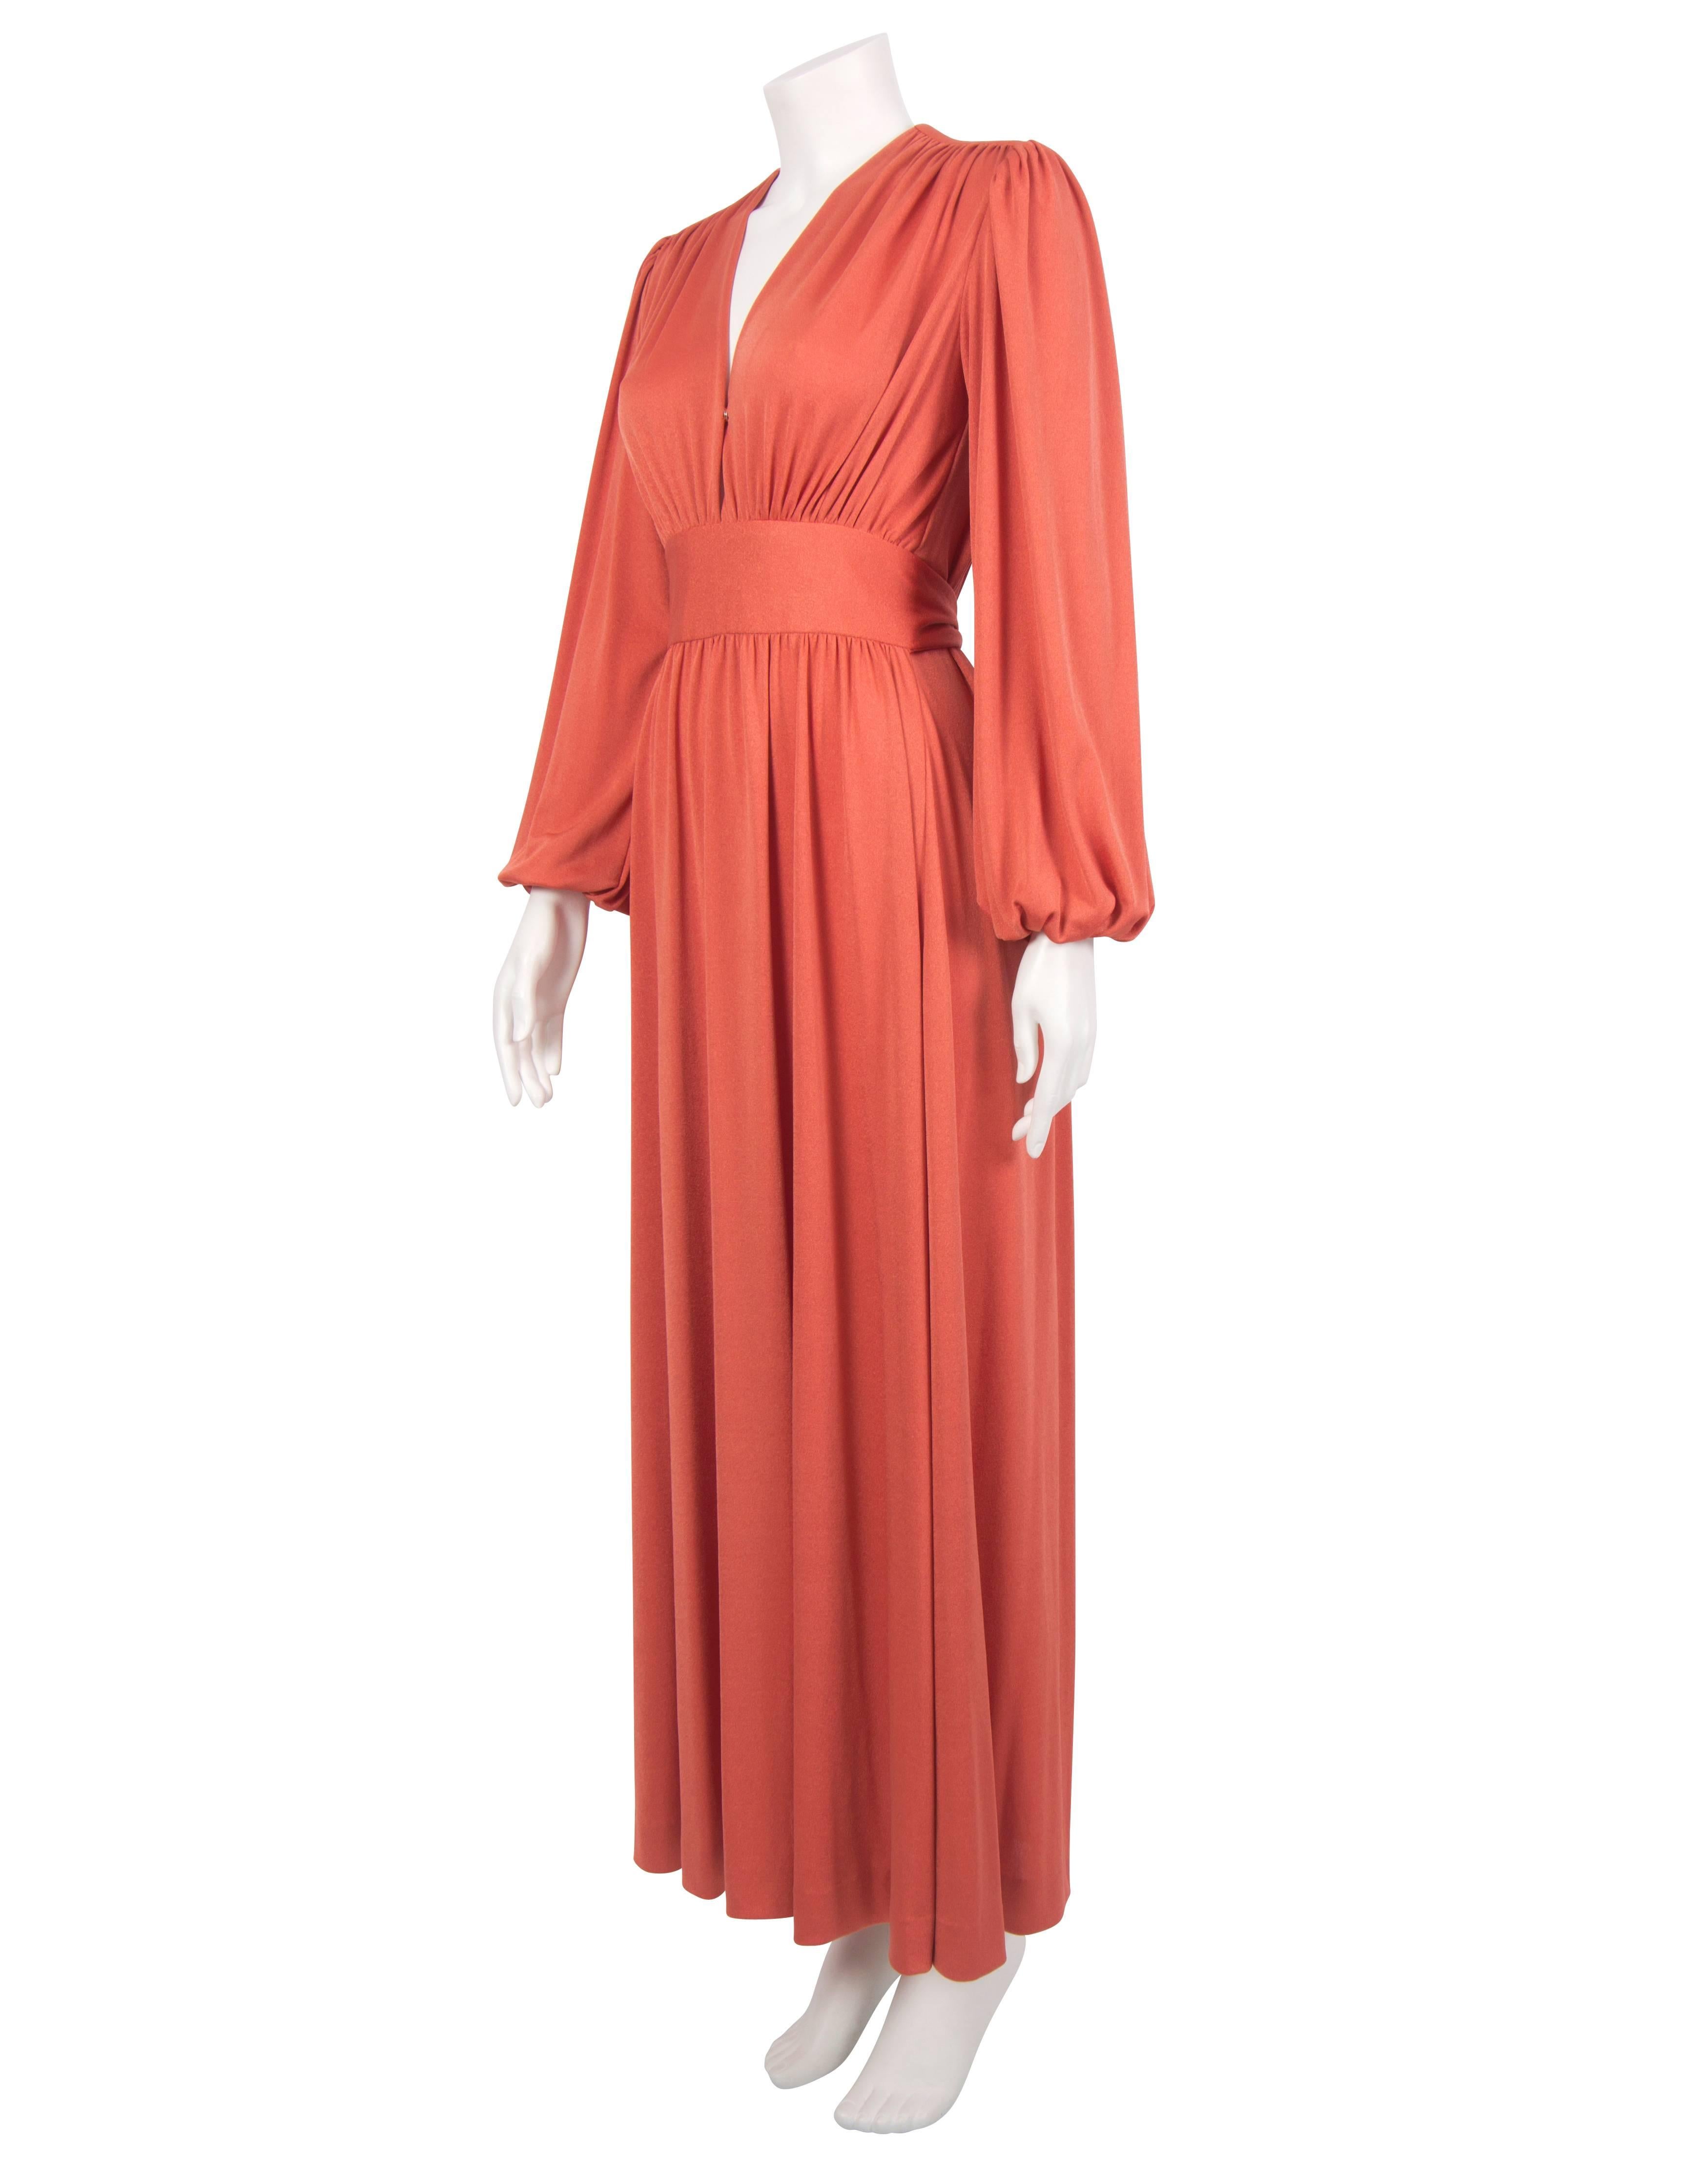 A gorgeous 1970's jersey dress featuring a plunging V neckline and poet sleeves. The dress has a fluid design with a draped bodice and sewn-in belts coming from the sides which tie around the waist, accentuating the décolletage. The skirt flows